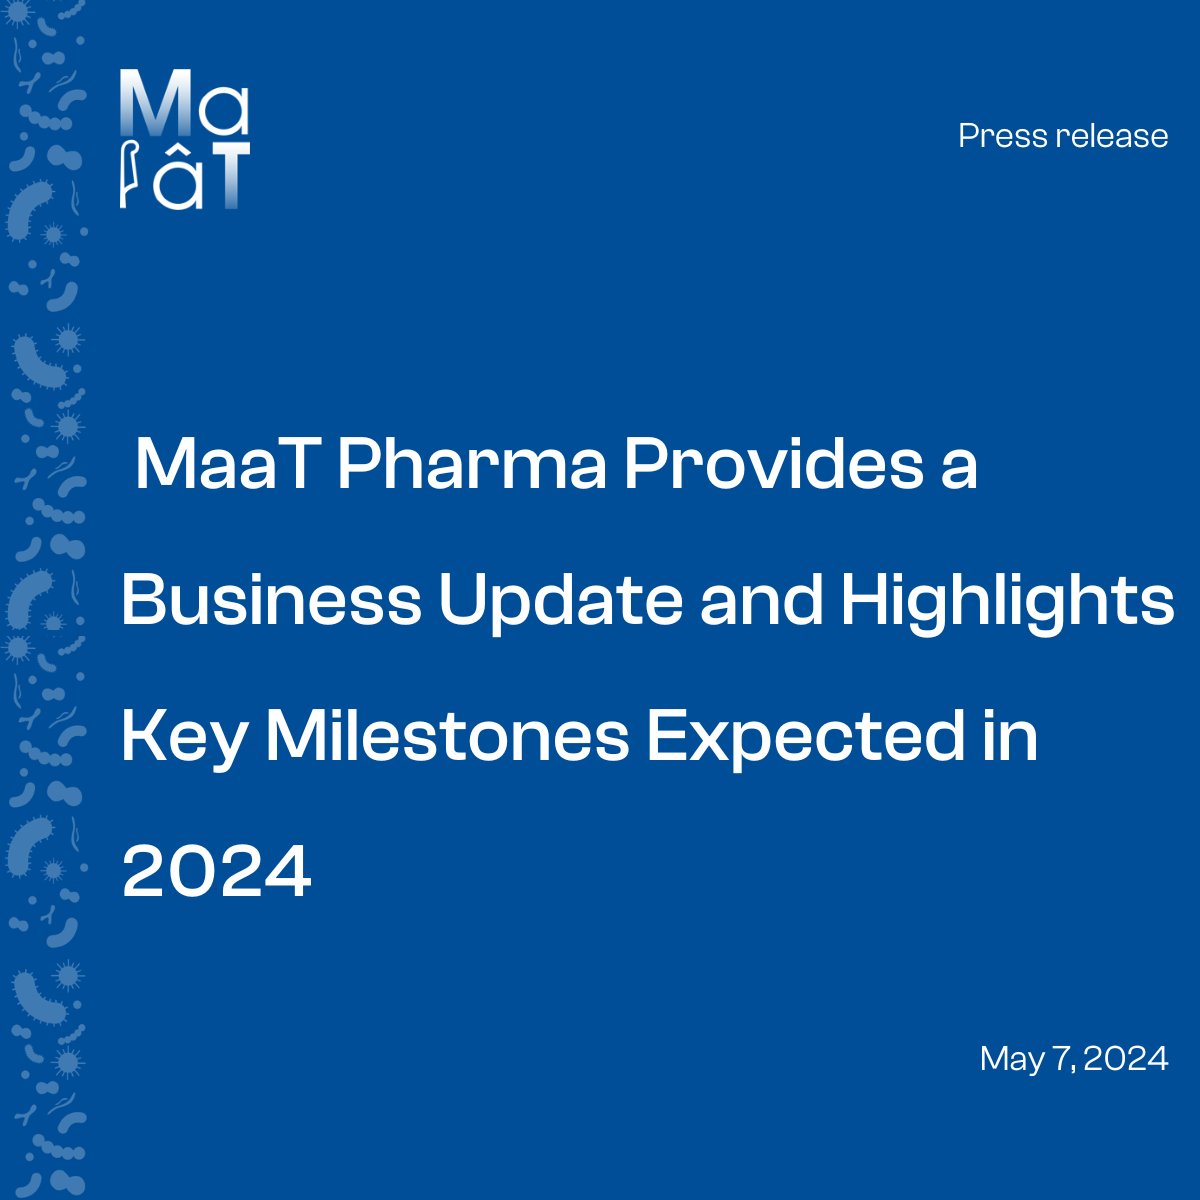 📄 [Press Release] – MaaT Pharma Provides a Business Update and Highlights Key Milestones Expected in 2024
👉see press release: maatpharma.com/may-7-2024-maa…

#GvHD #MaaT013 #MaaT033 #Microbiome #Microbiota #LungCancer #Oncology #Cancer